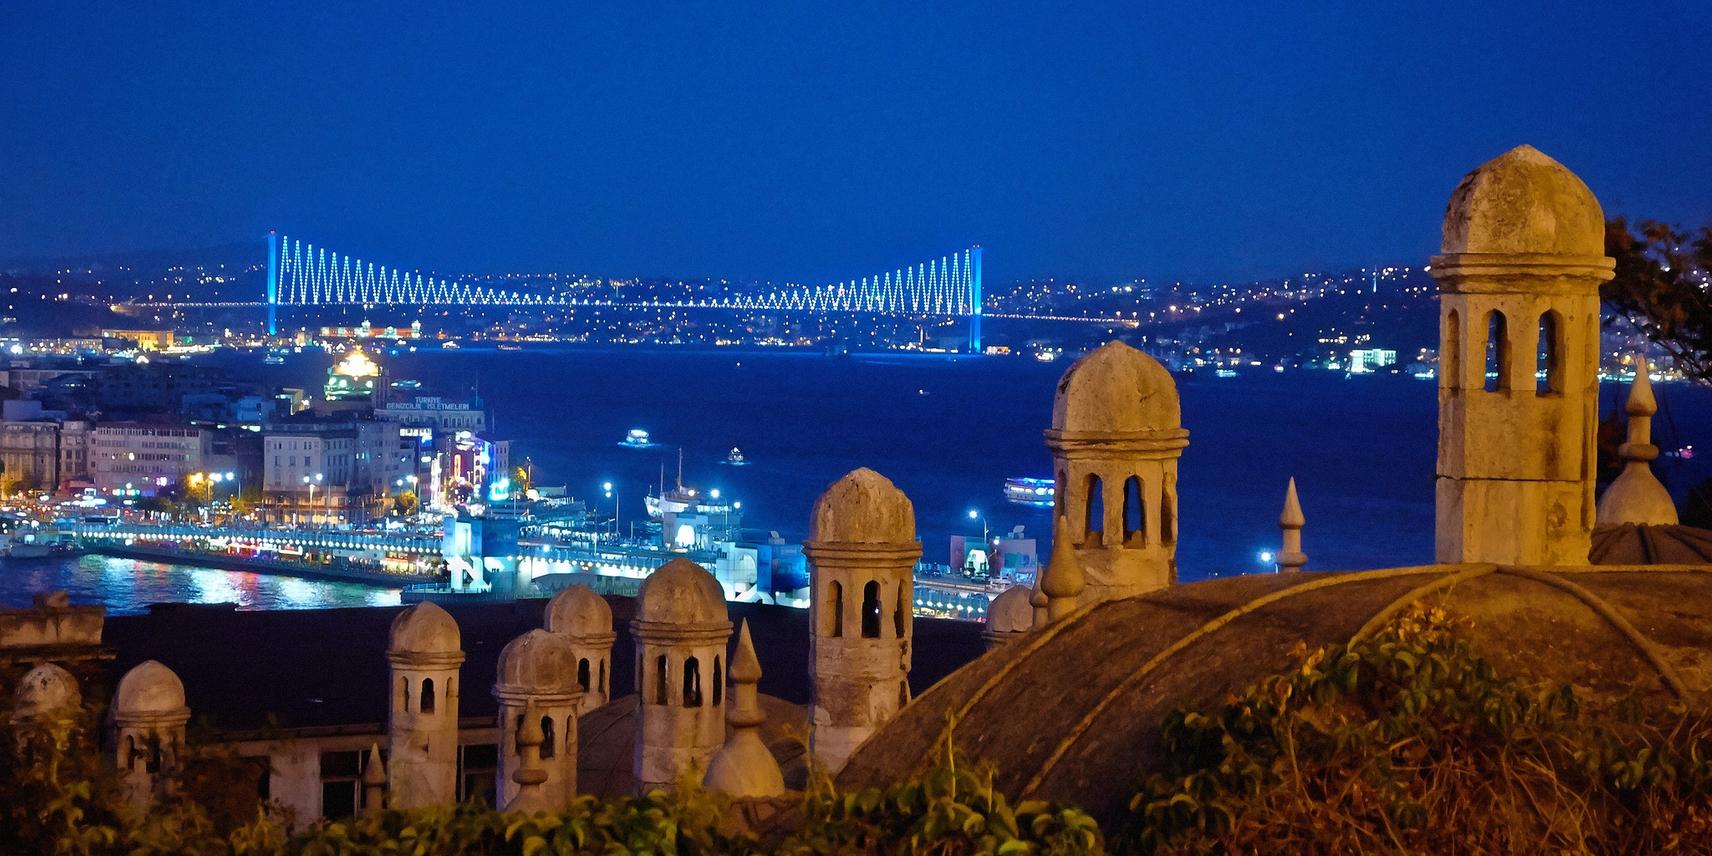 An image of Istanbul